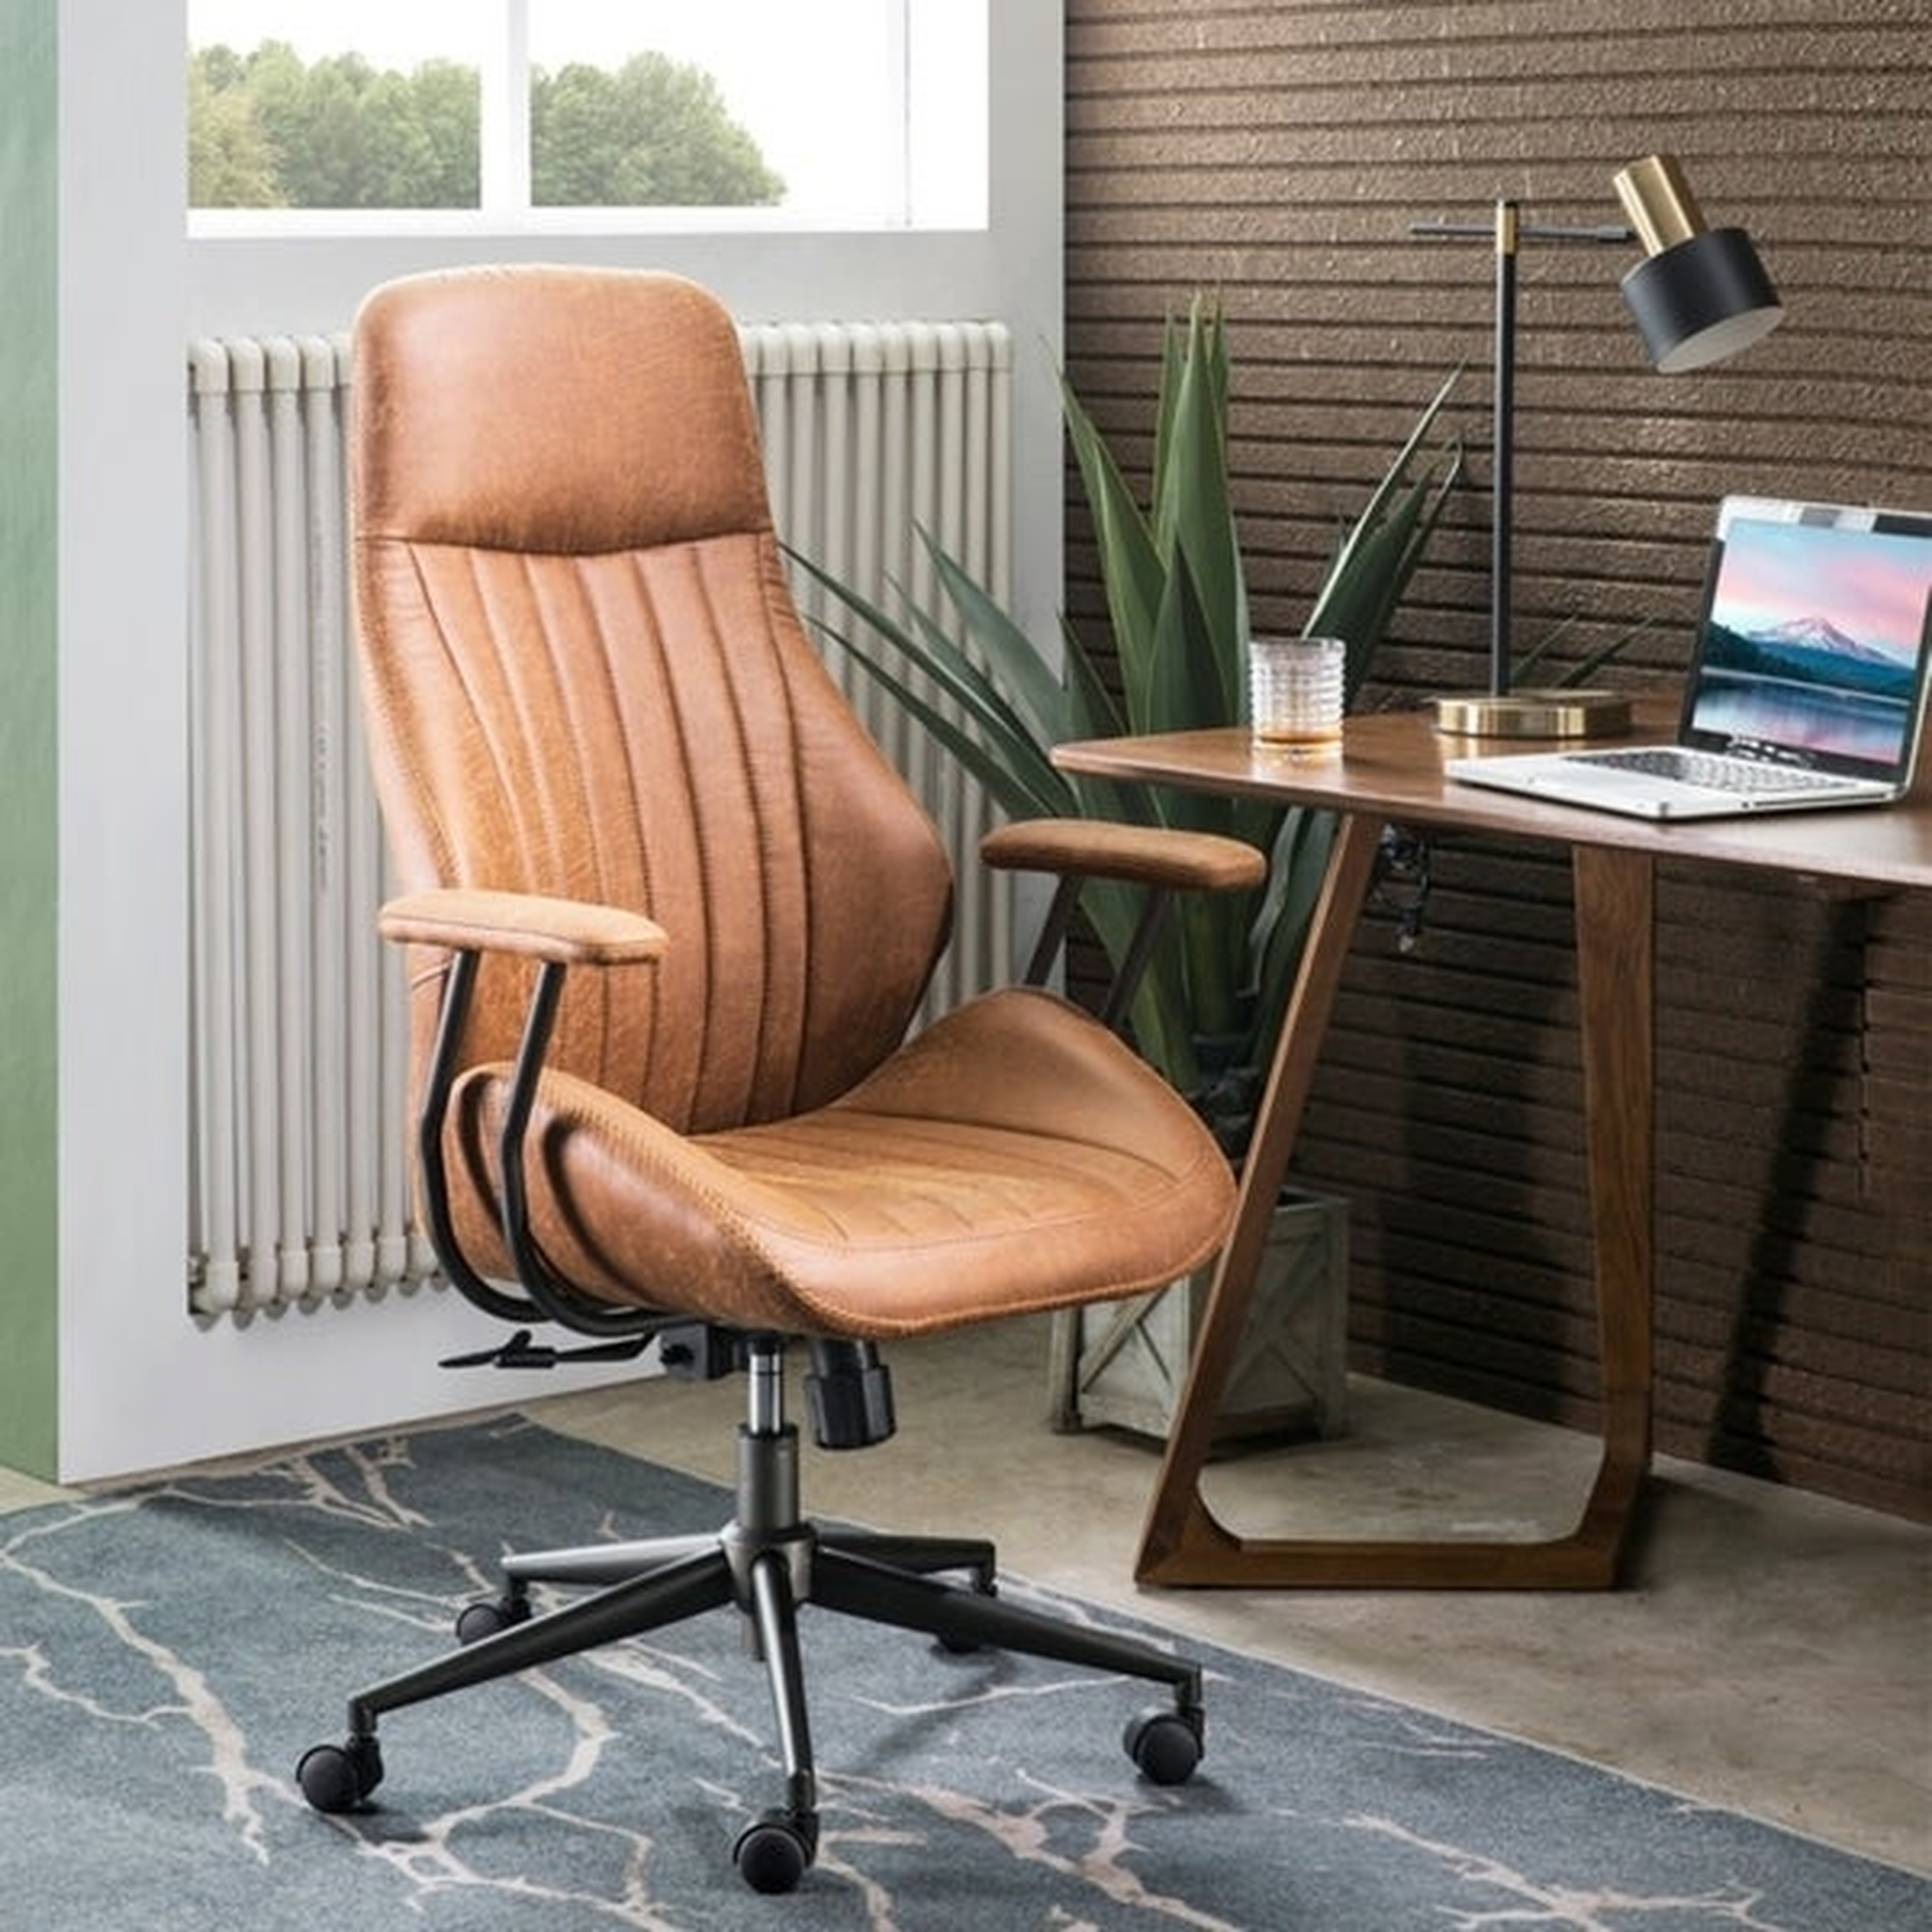 Ovios Ergonomic Office Chair Computer Desk Chair Suede Fabric Desk Chair with Lumbar Support for Executive or Home Office - Coffee - Overstock